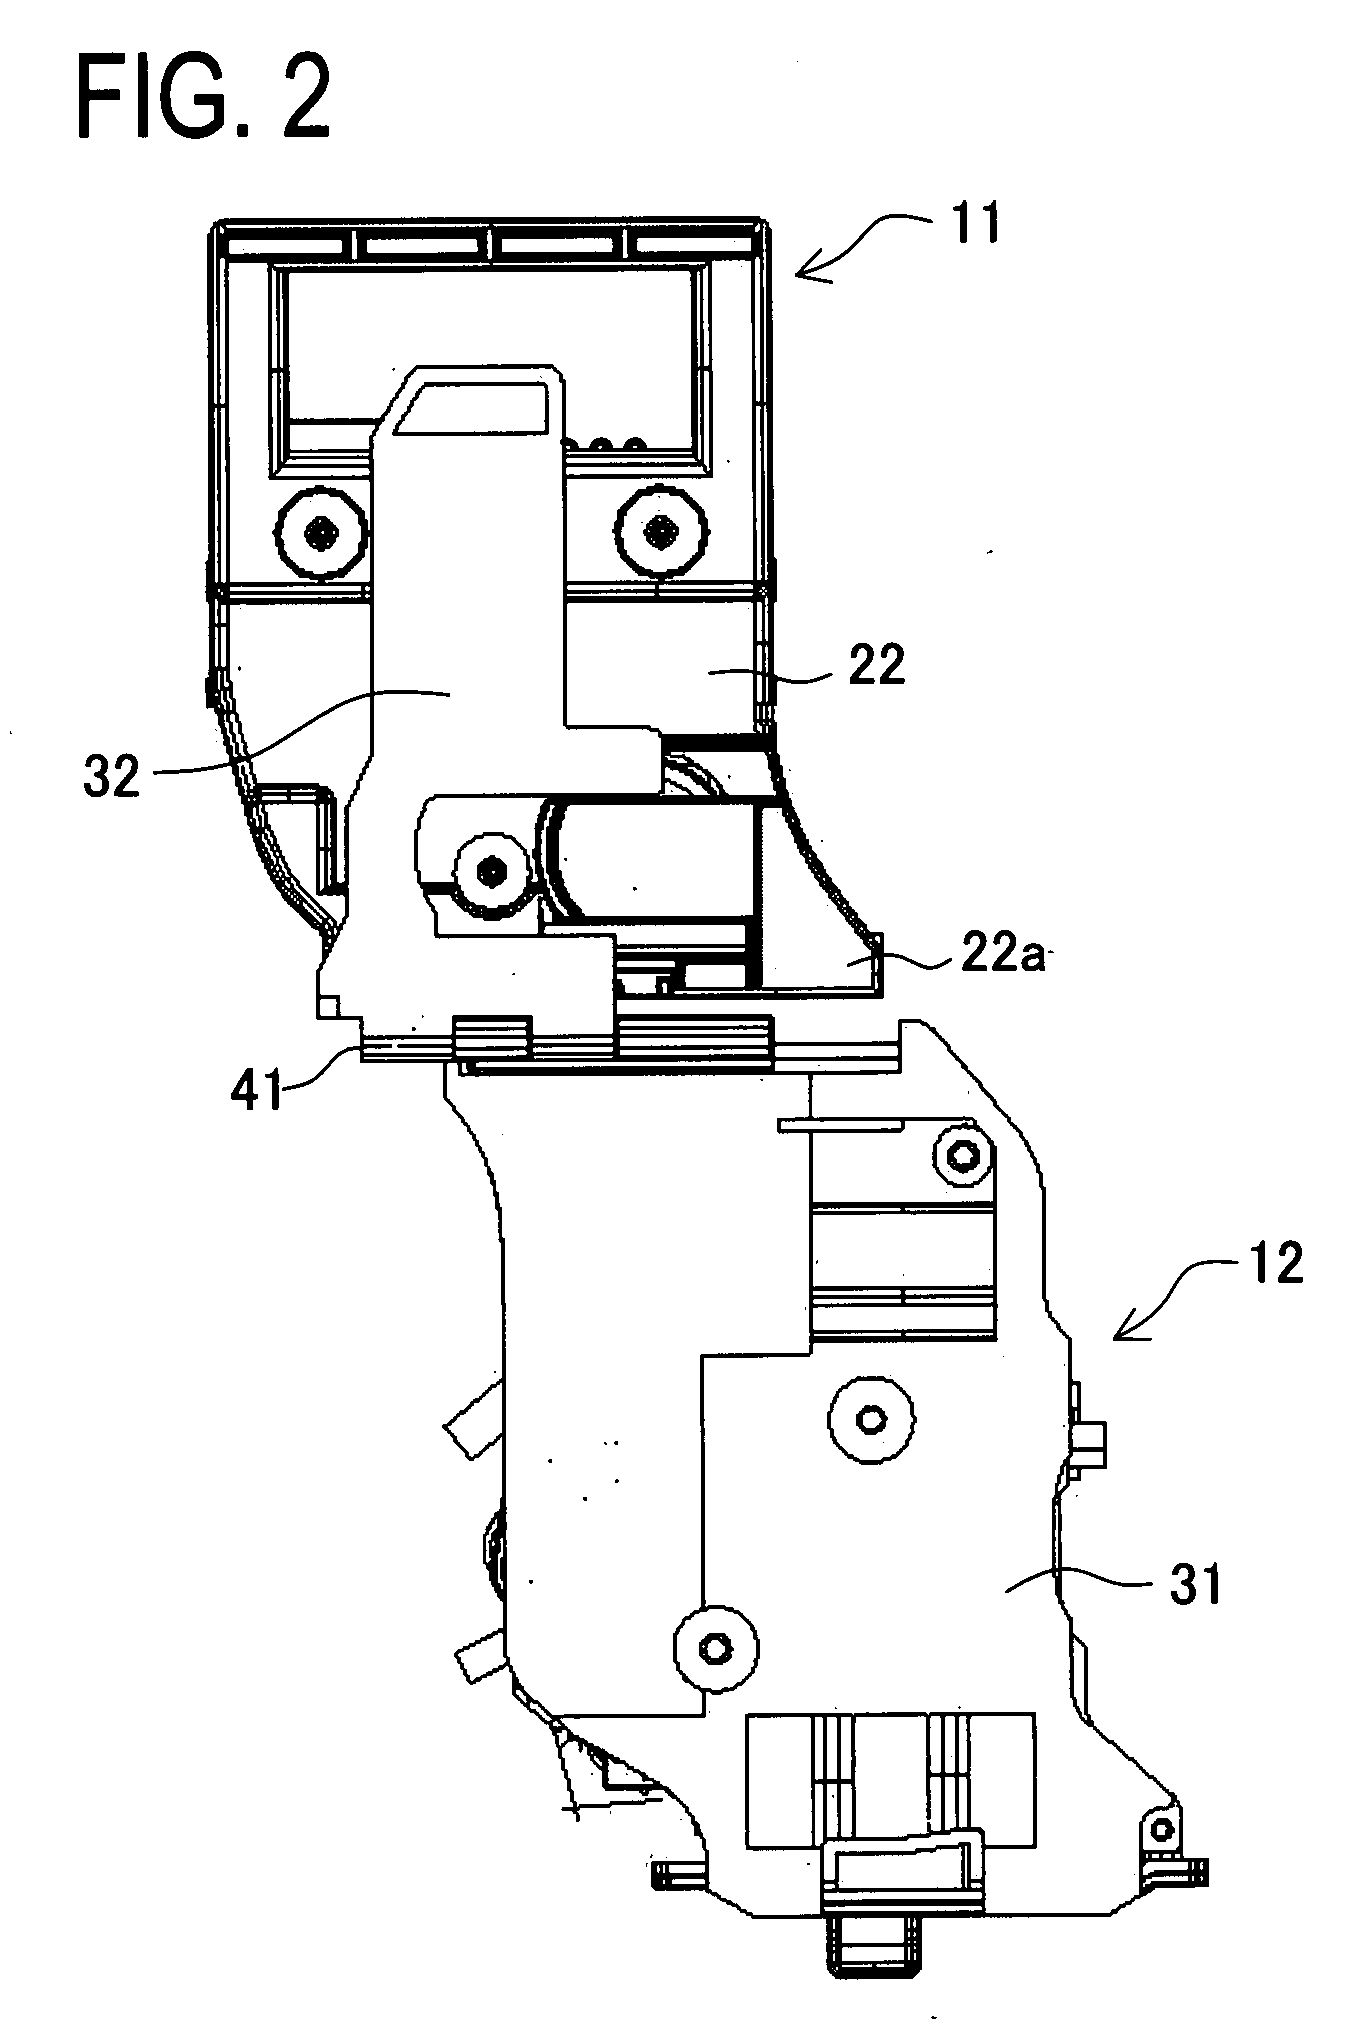 Toner cartridge, process cartridge, image cartridge, and image forming apparatus to which those cartridges are attachable